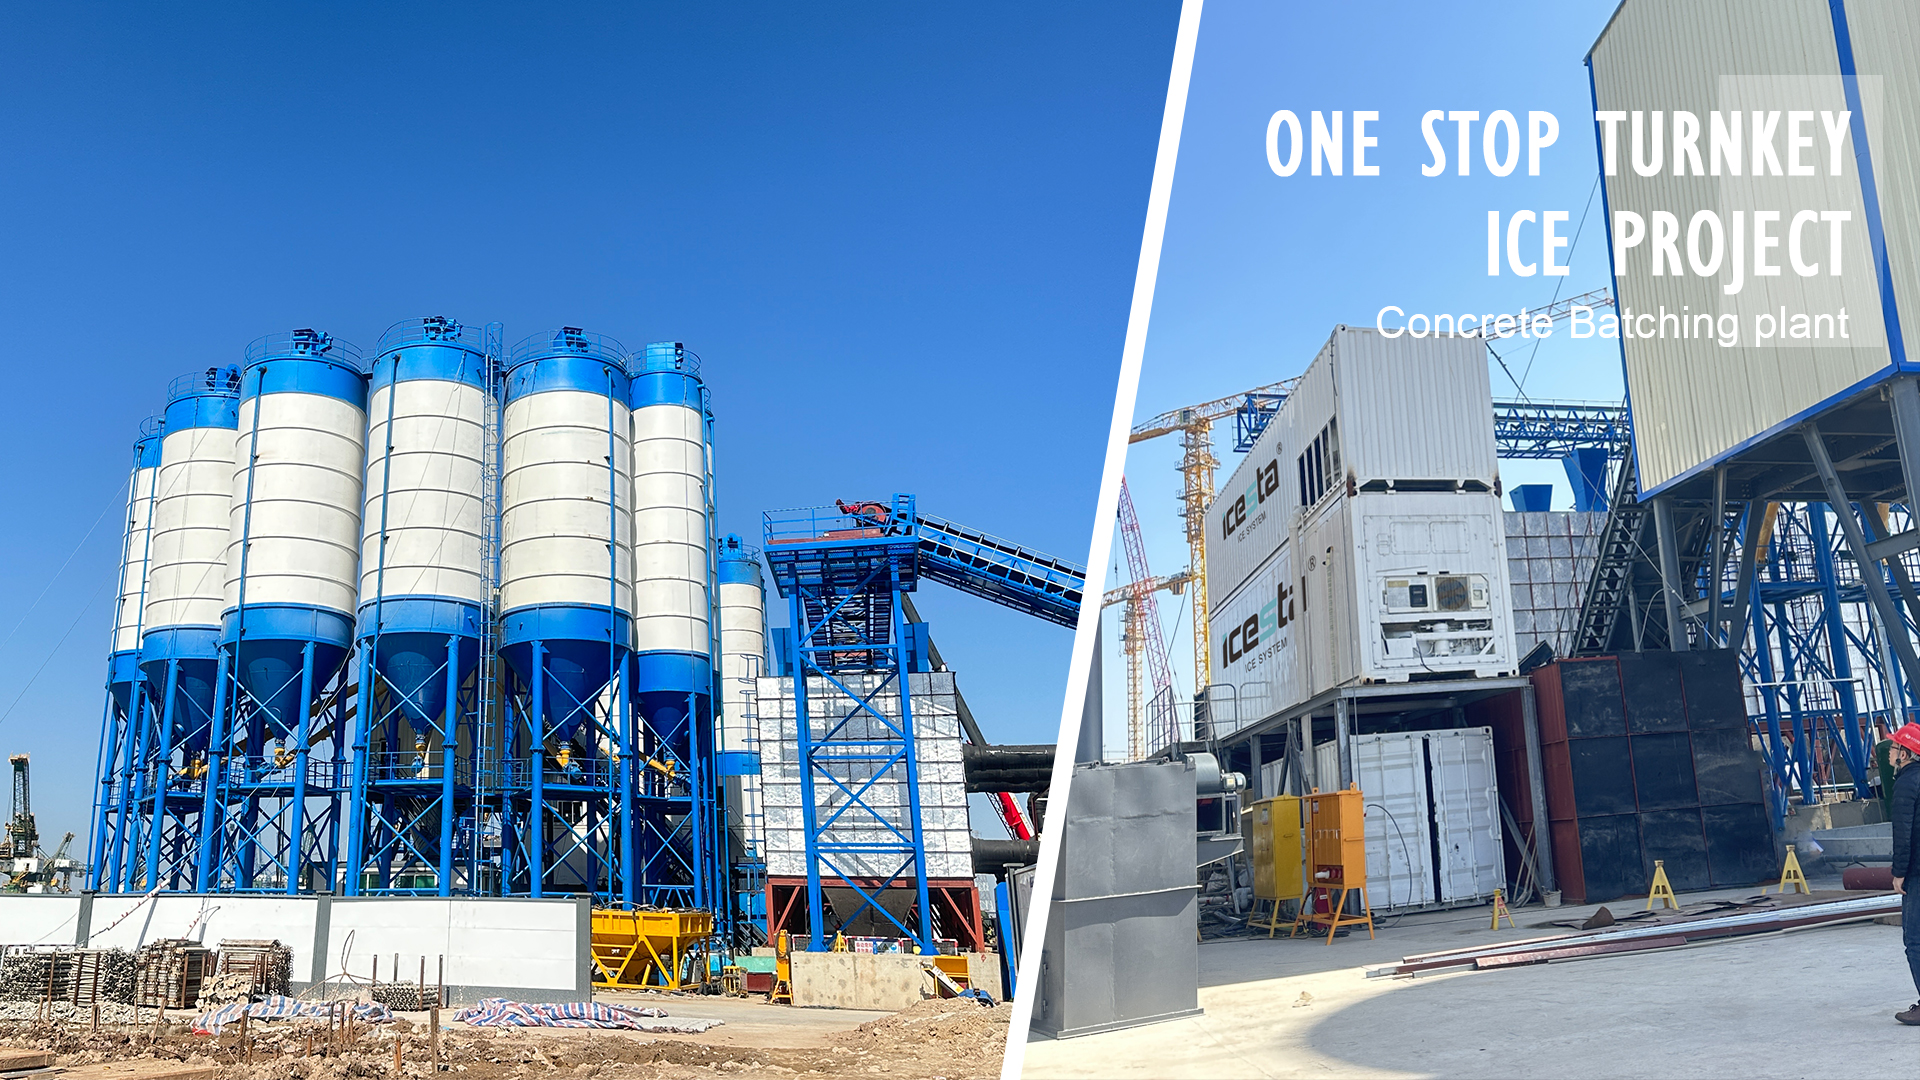 One-stop Turnkey Ice Project - Concrete Batching plant cooling system